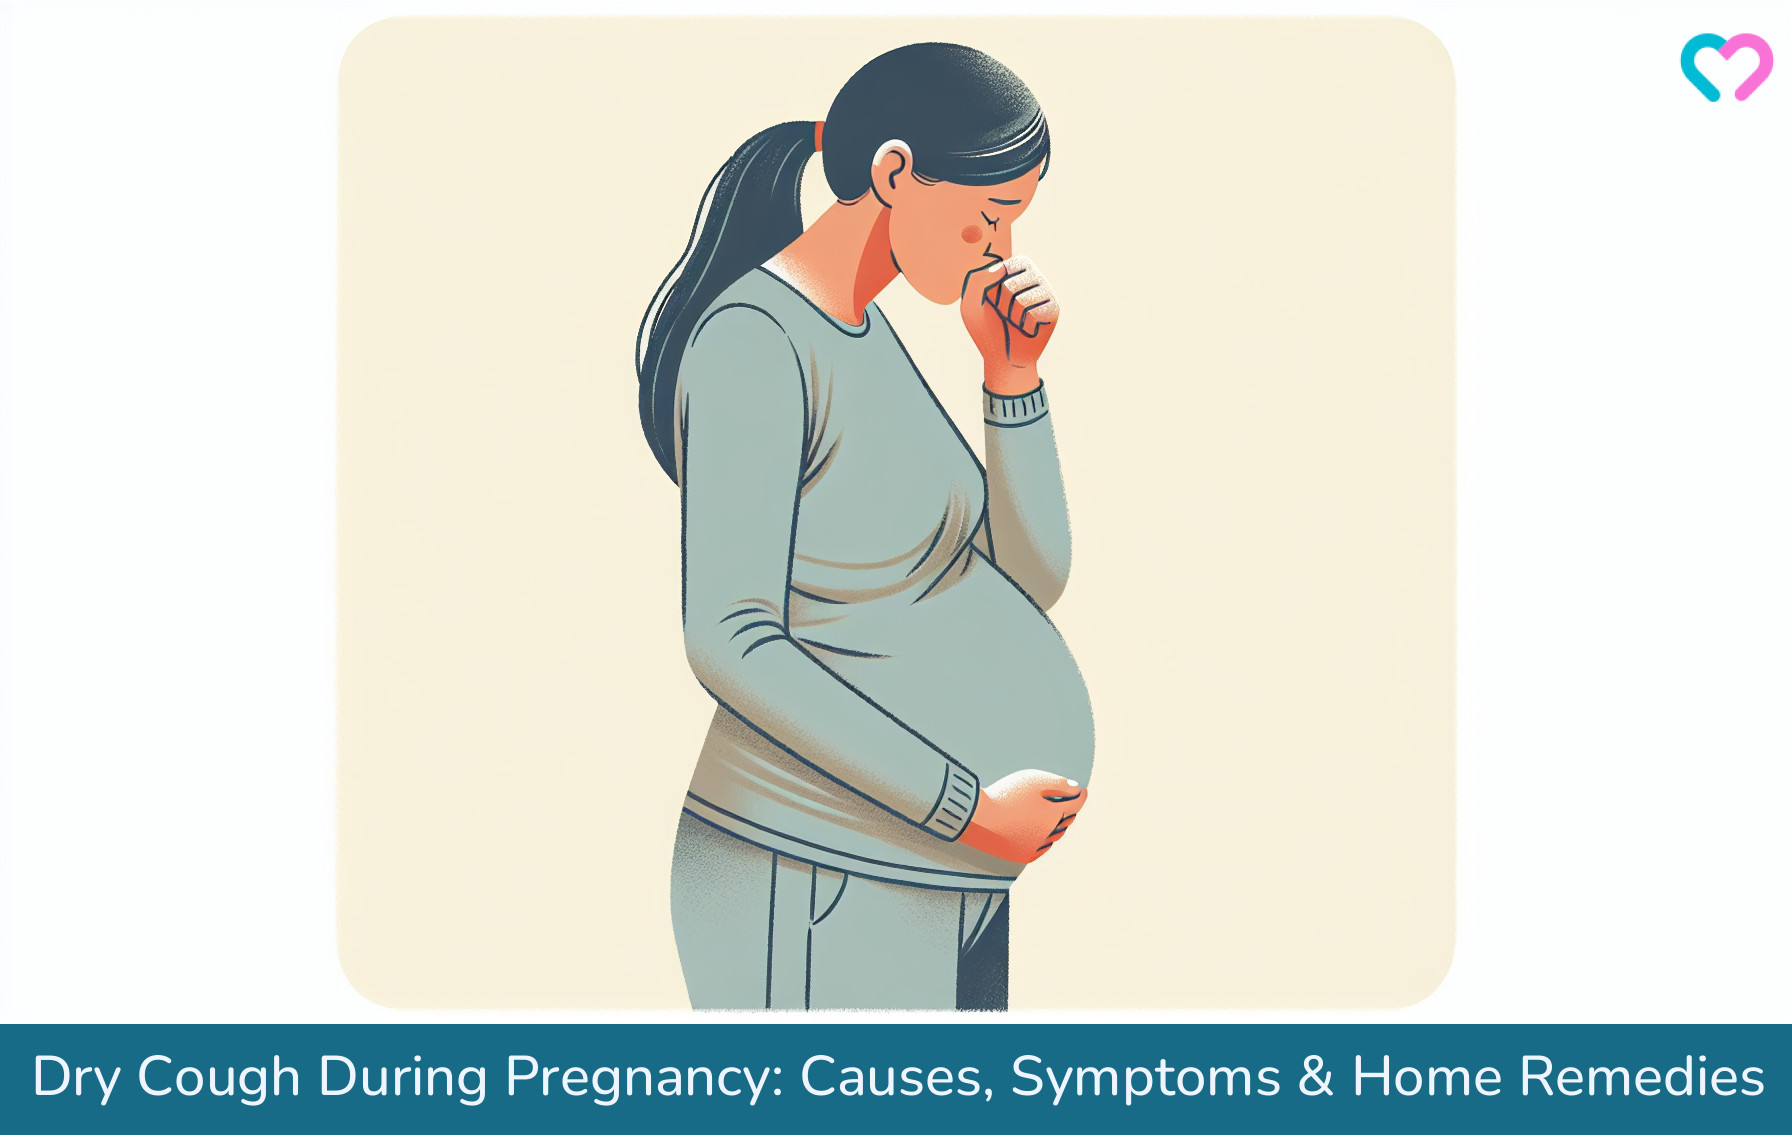 dry cough during pregnancy_illustration